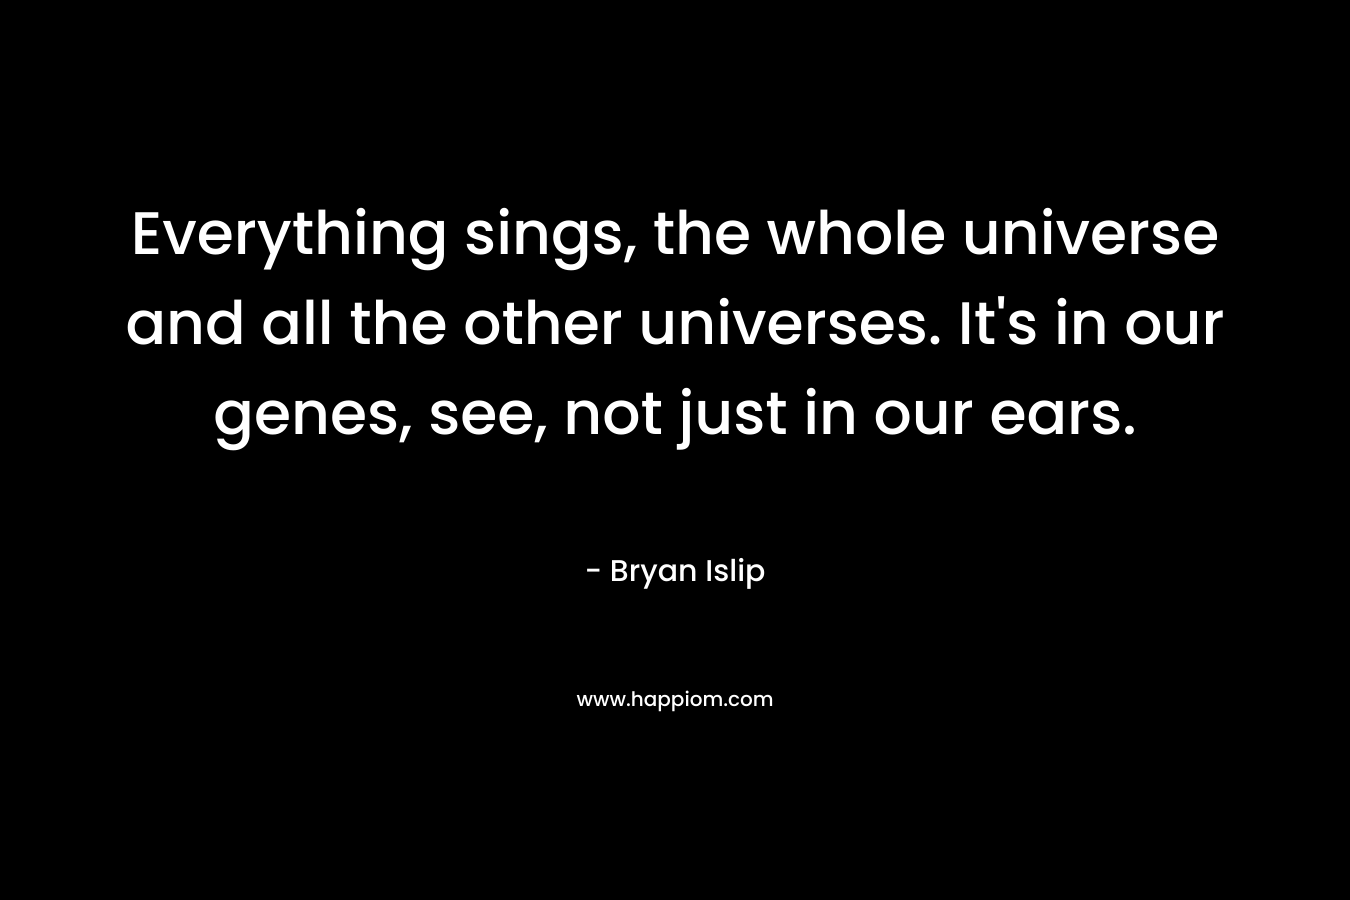 Everything sings, the whole universe and all the other universes. It's in our genes, see, not just in our ears.